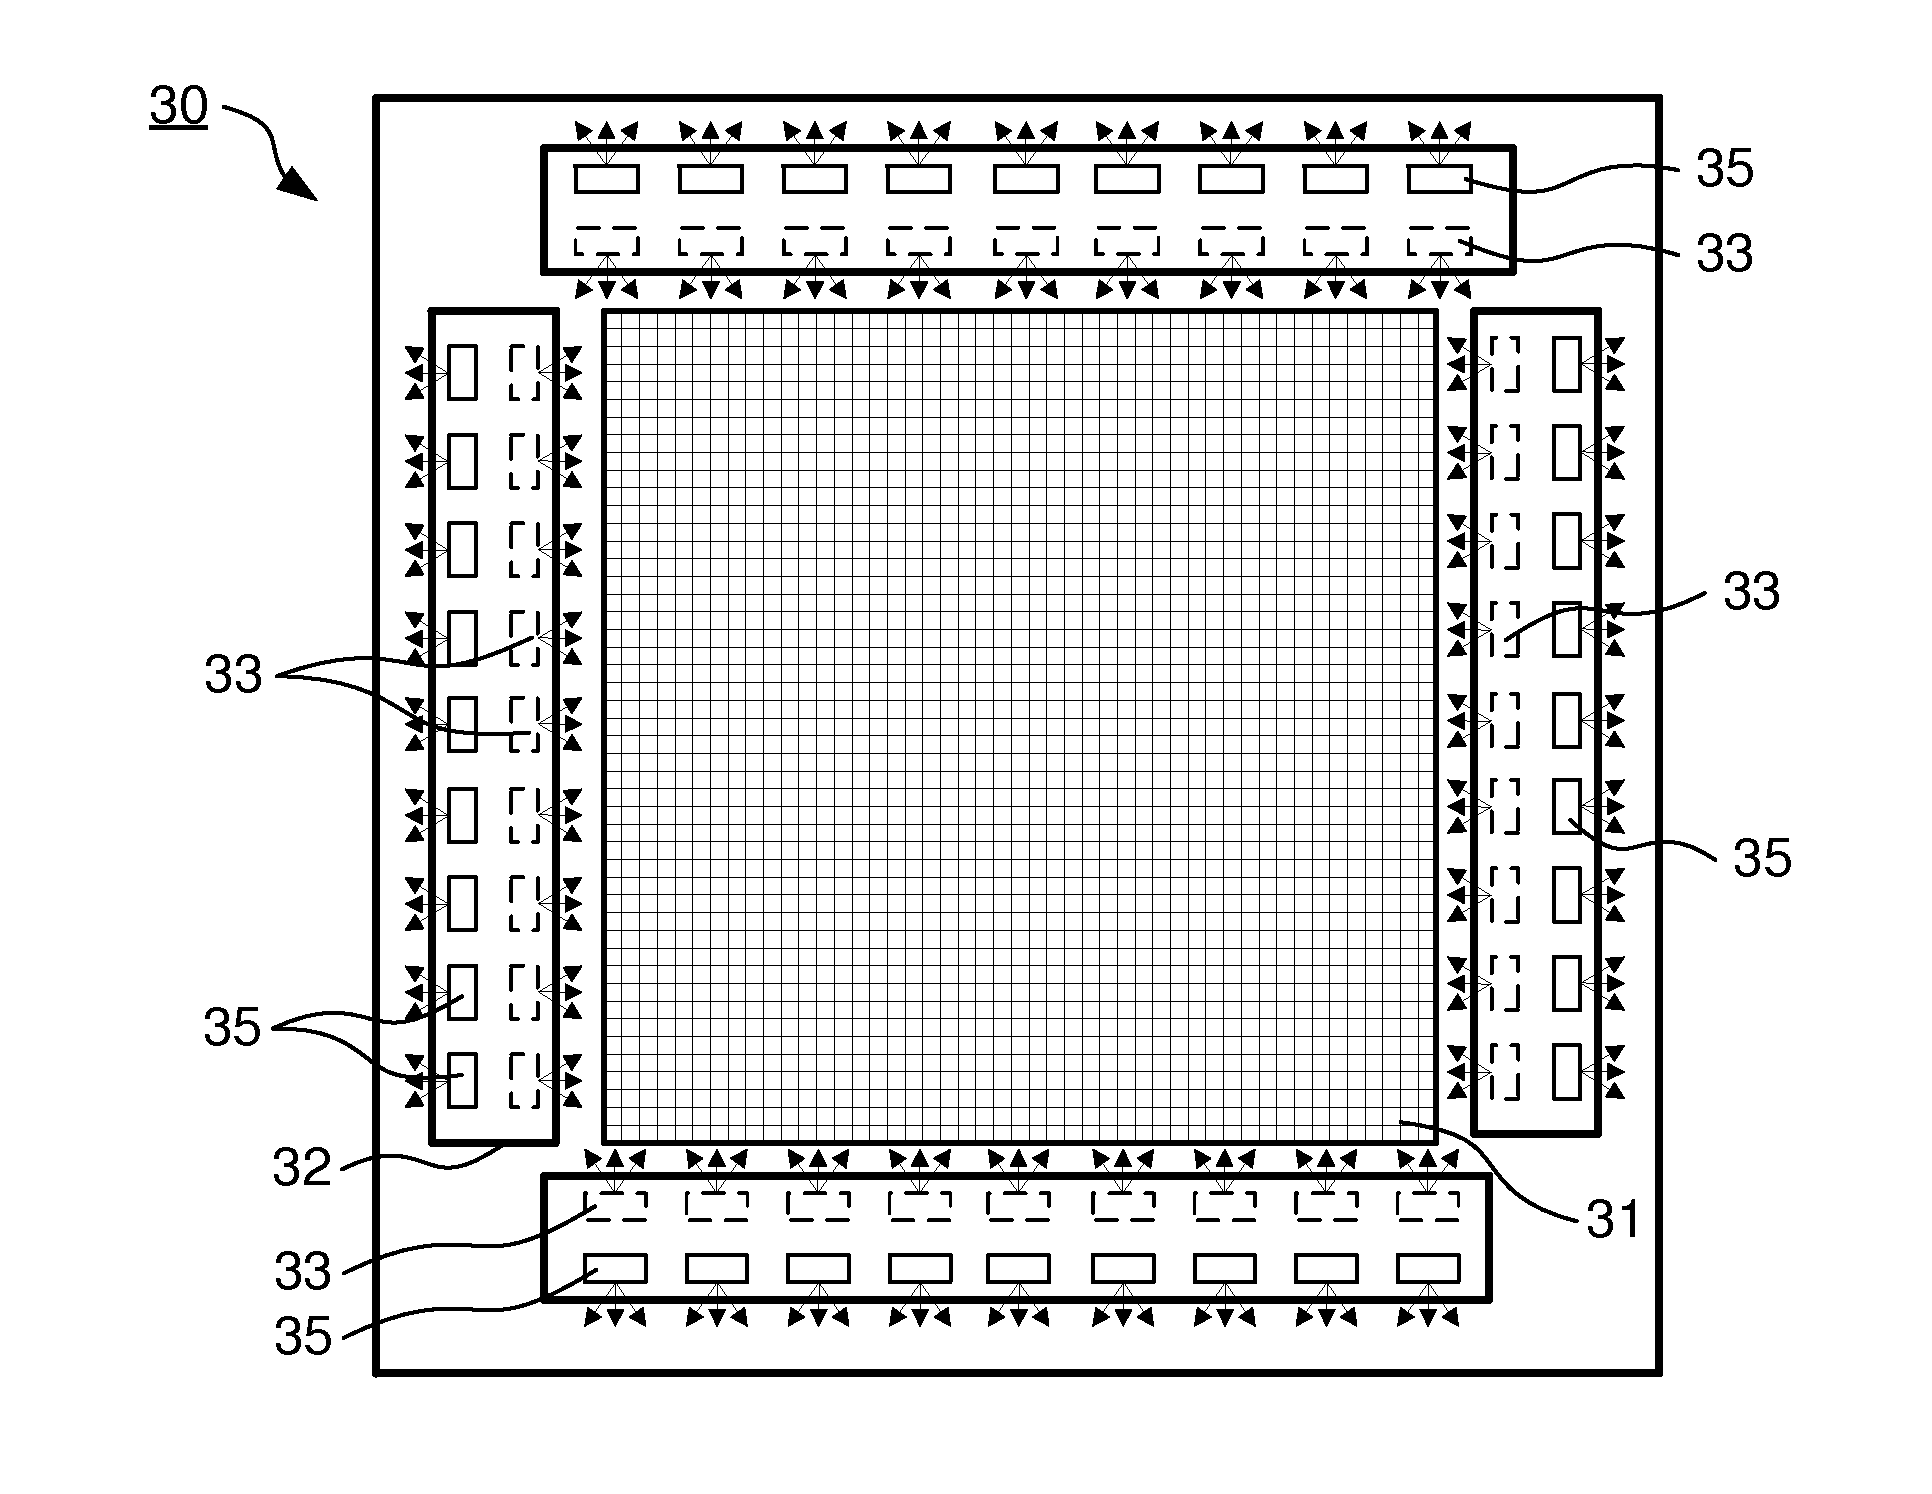 Display device, method of controlling a light emitting diode array of the display device, and computer program product